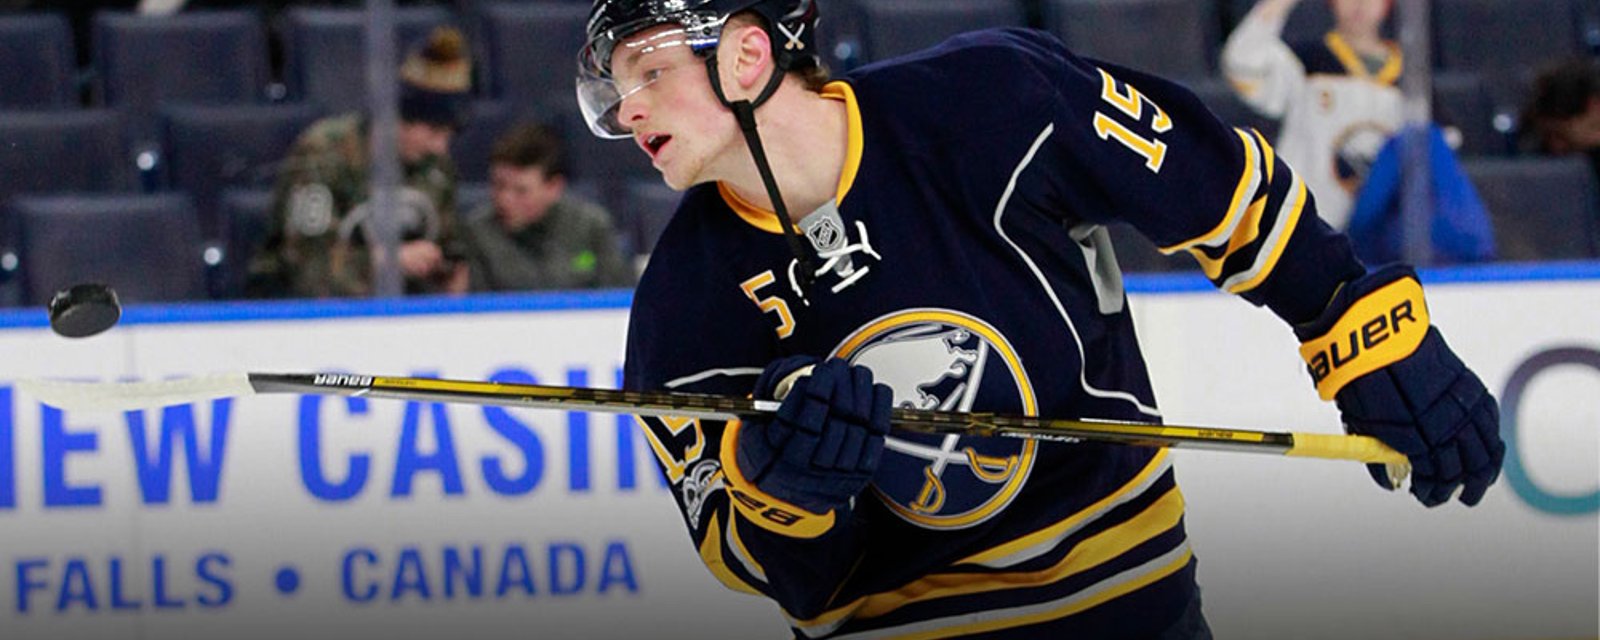 ​Your call: How many points will Jack Eichel score this season?